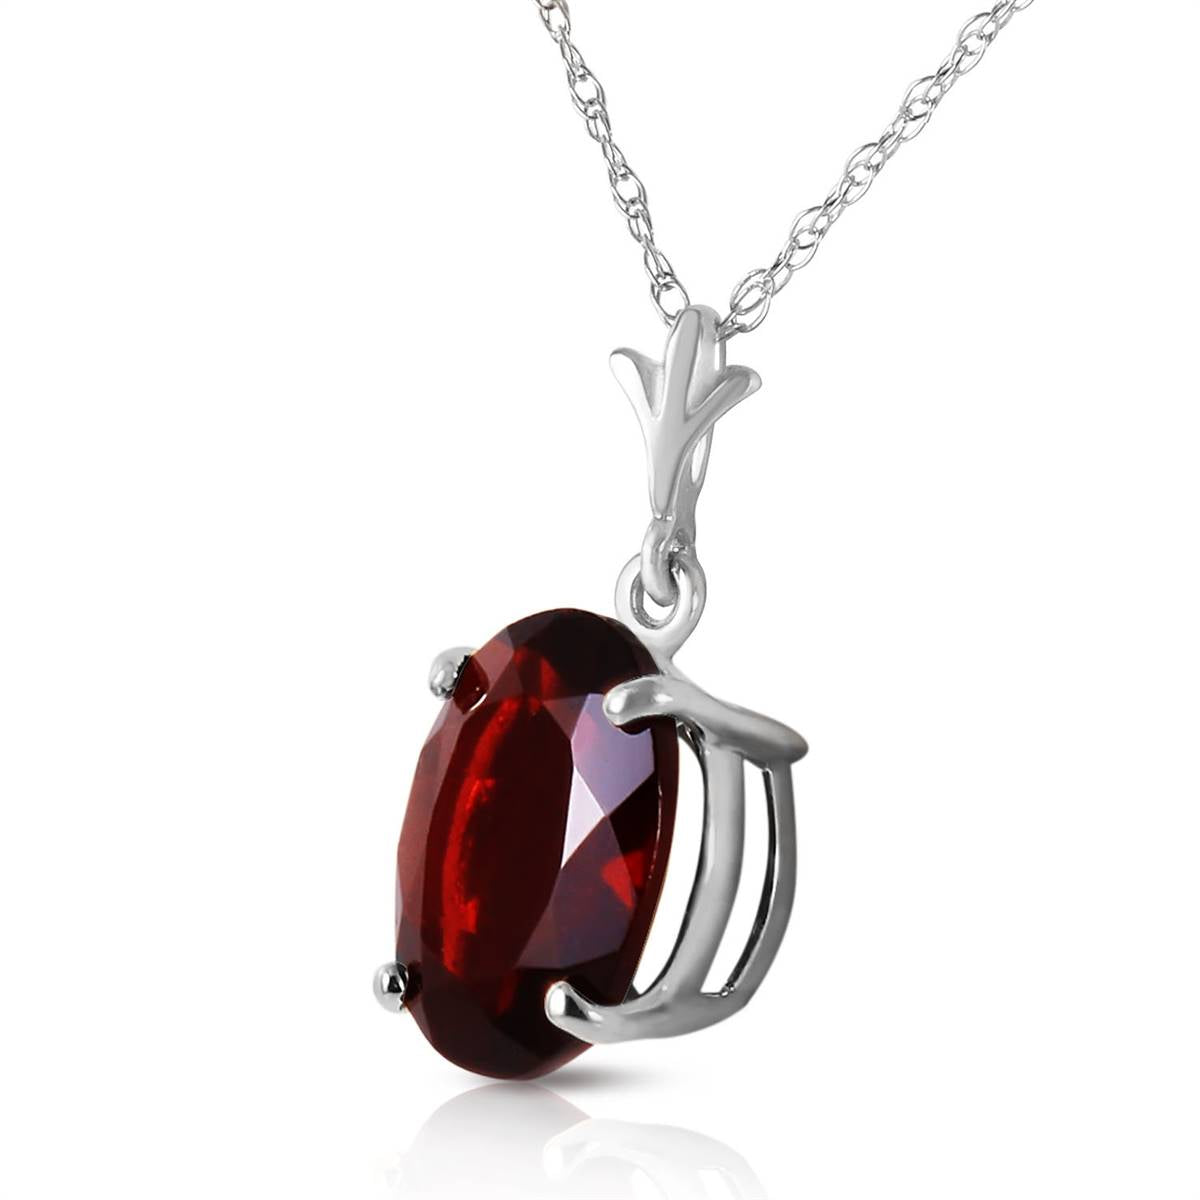 3.12 Carat 14K Solid White Gold Day Will Come Garnet Necklace